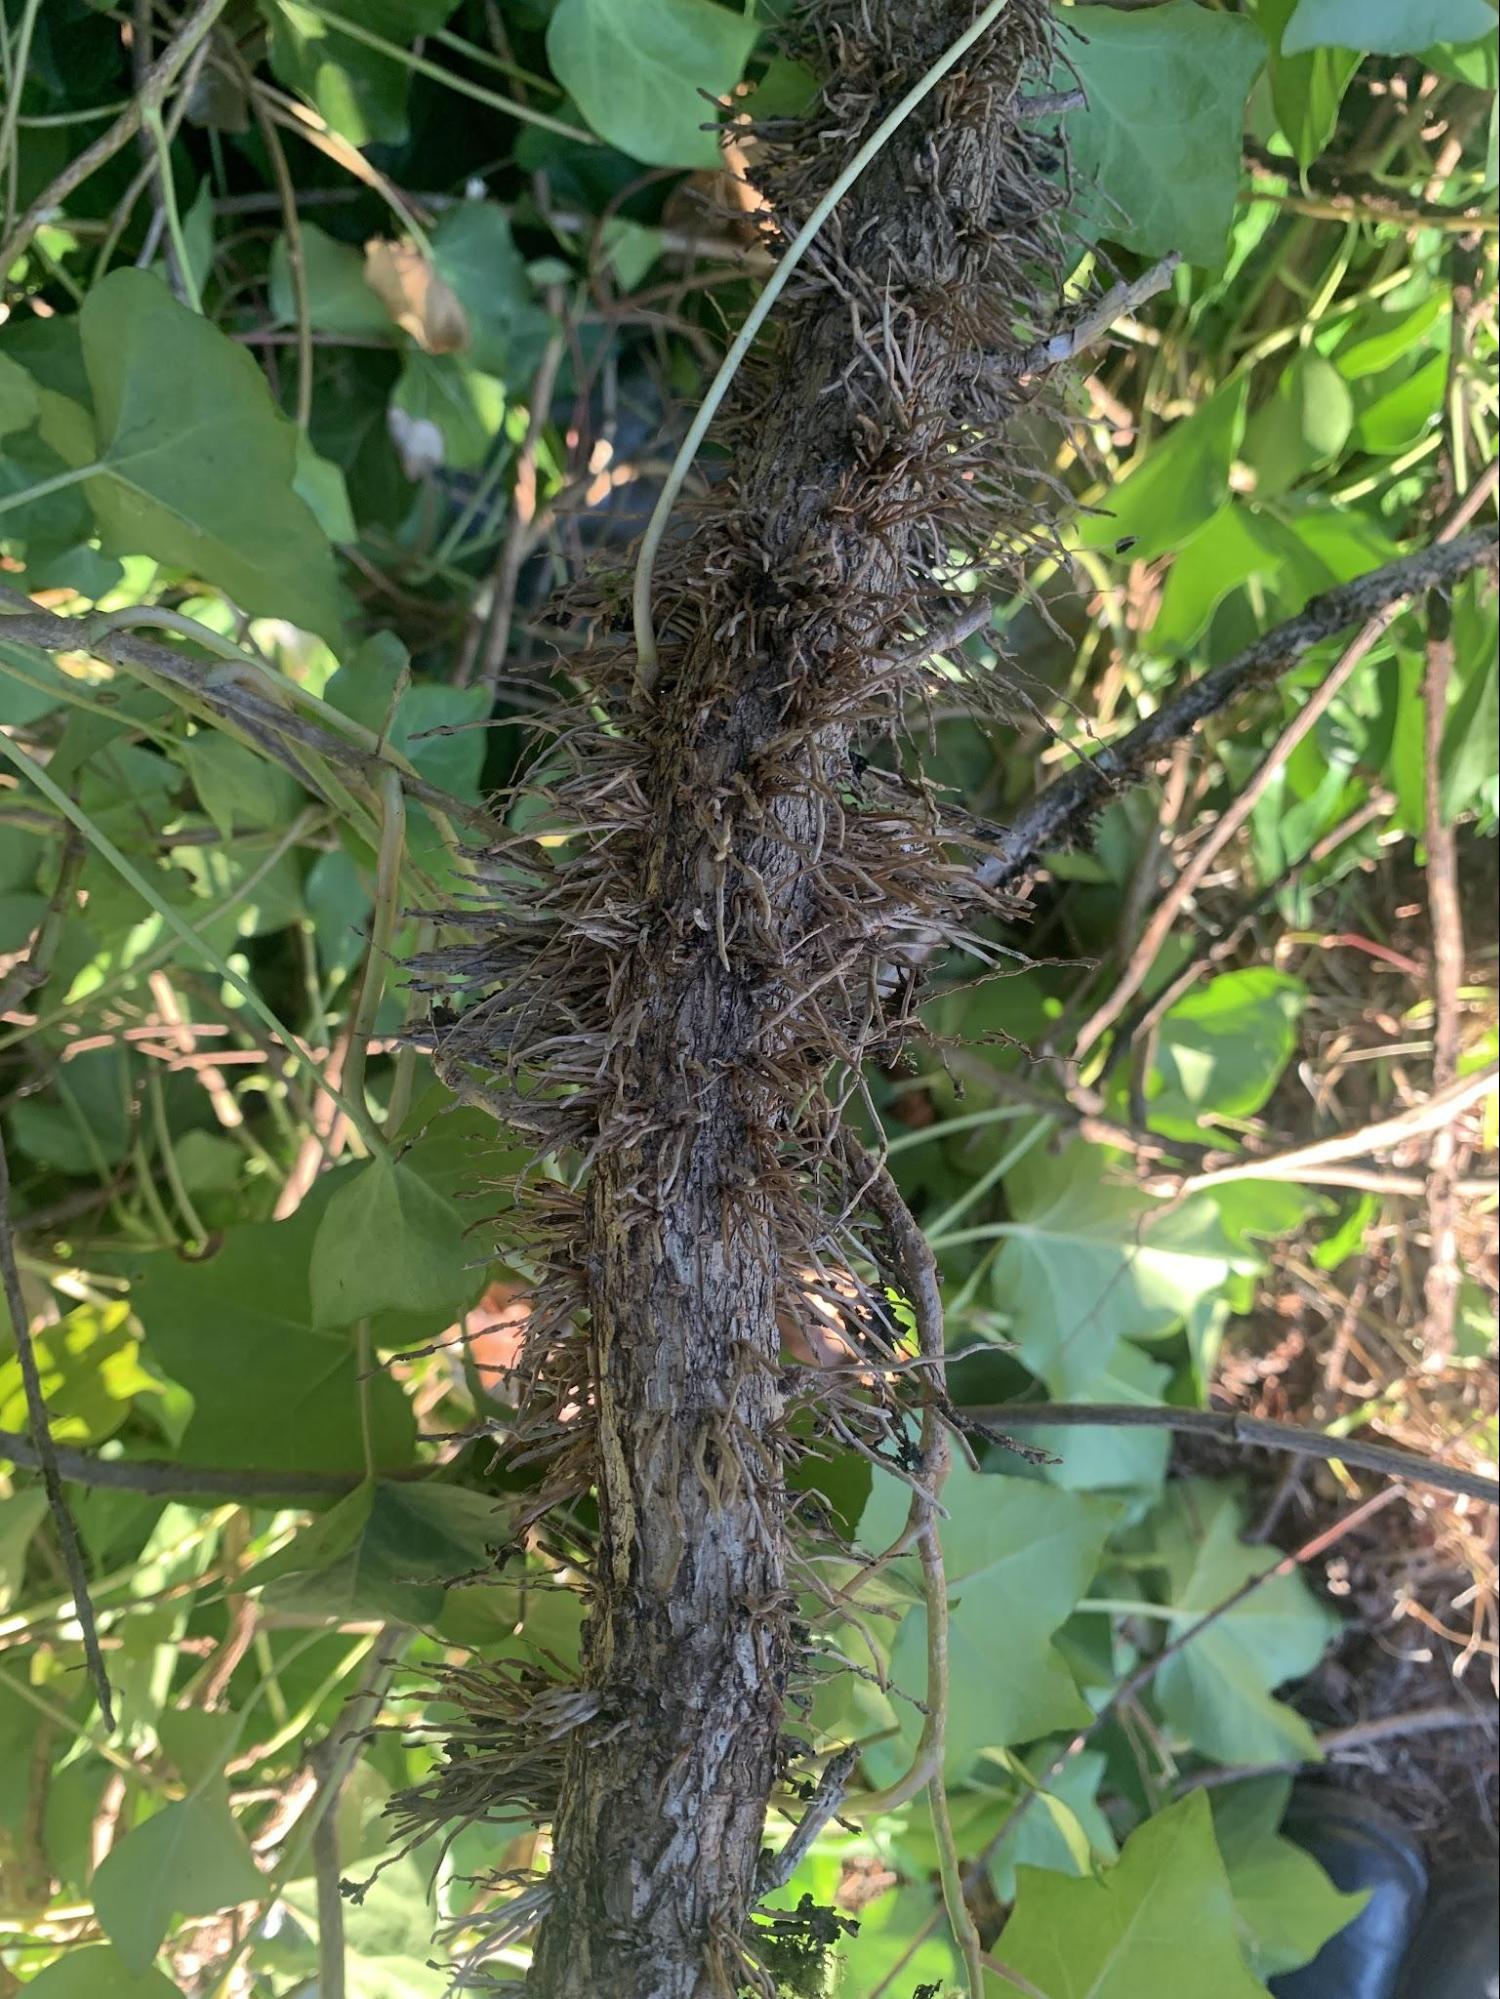 A thick ivy root, about 2 inches thick. These roots and vines can be flexible when smaller, or hard and wood like when they get more than about ½ an inch thick. When they get larger they also get many thin rootlets that grow out perpendicular to the main root and feel similar to scratchy twine. 